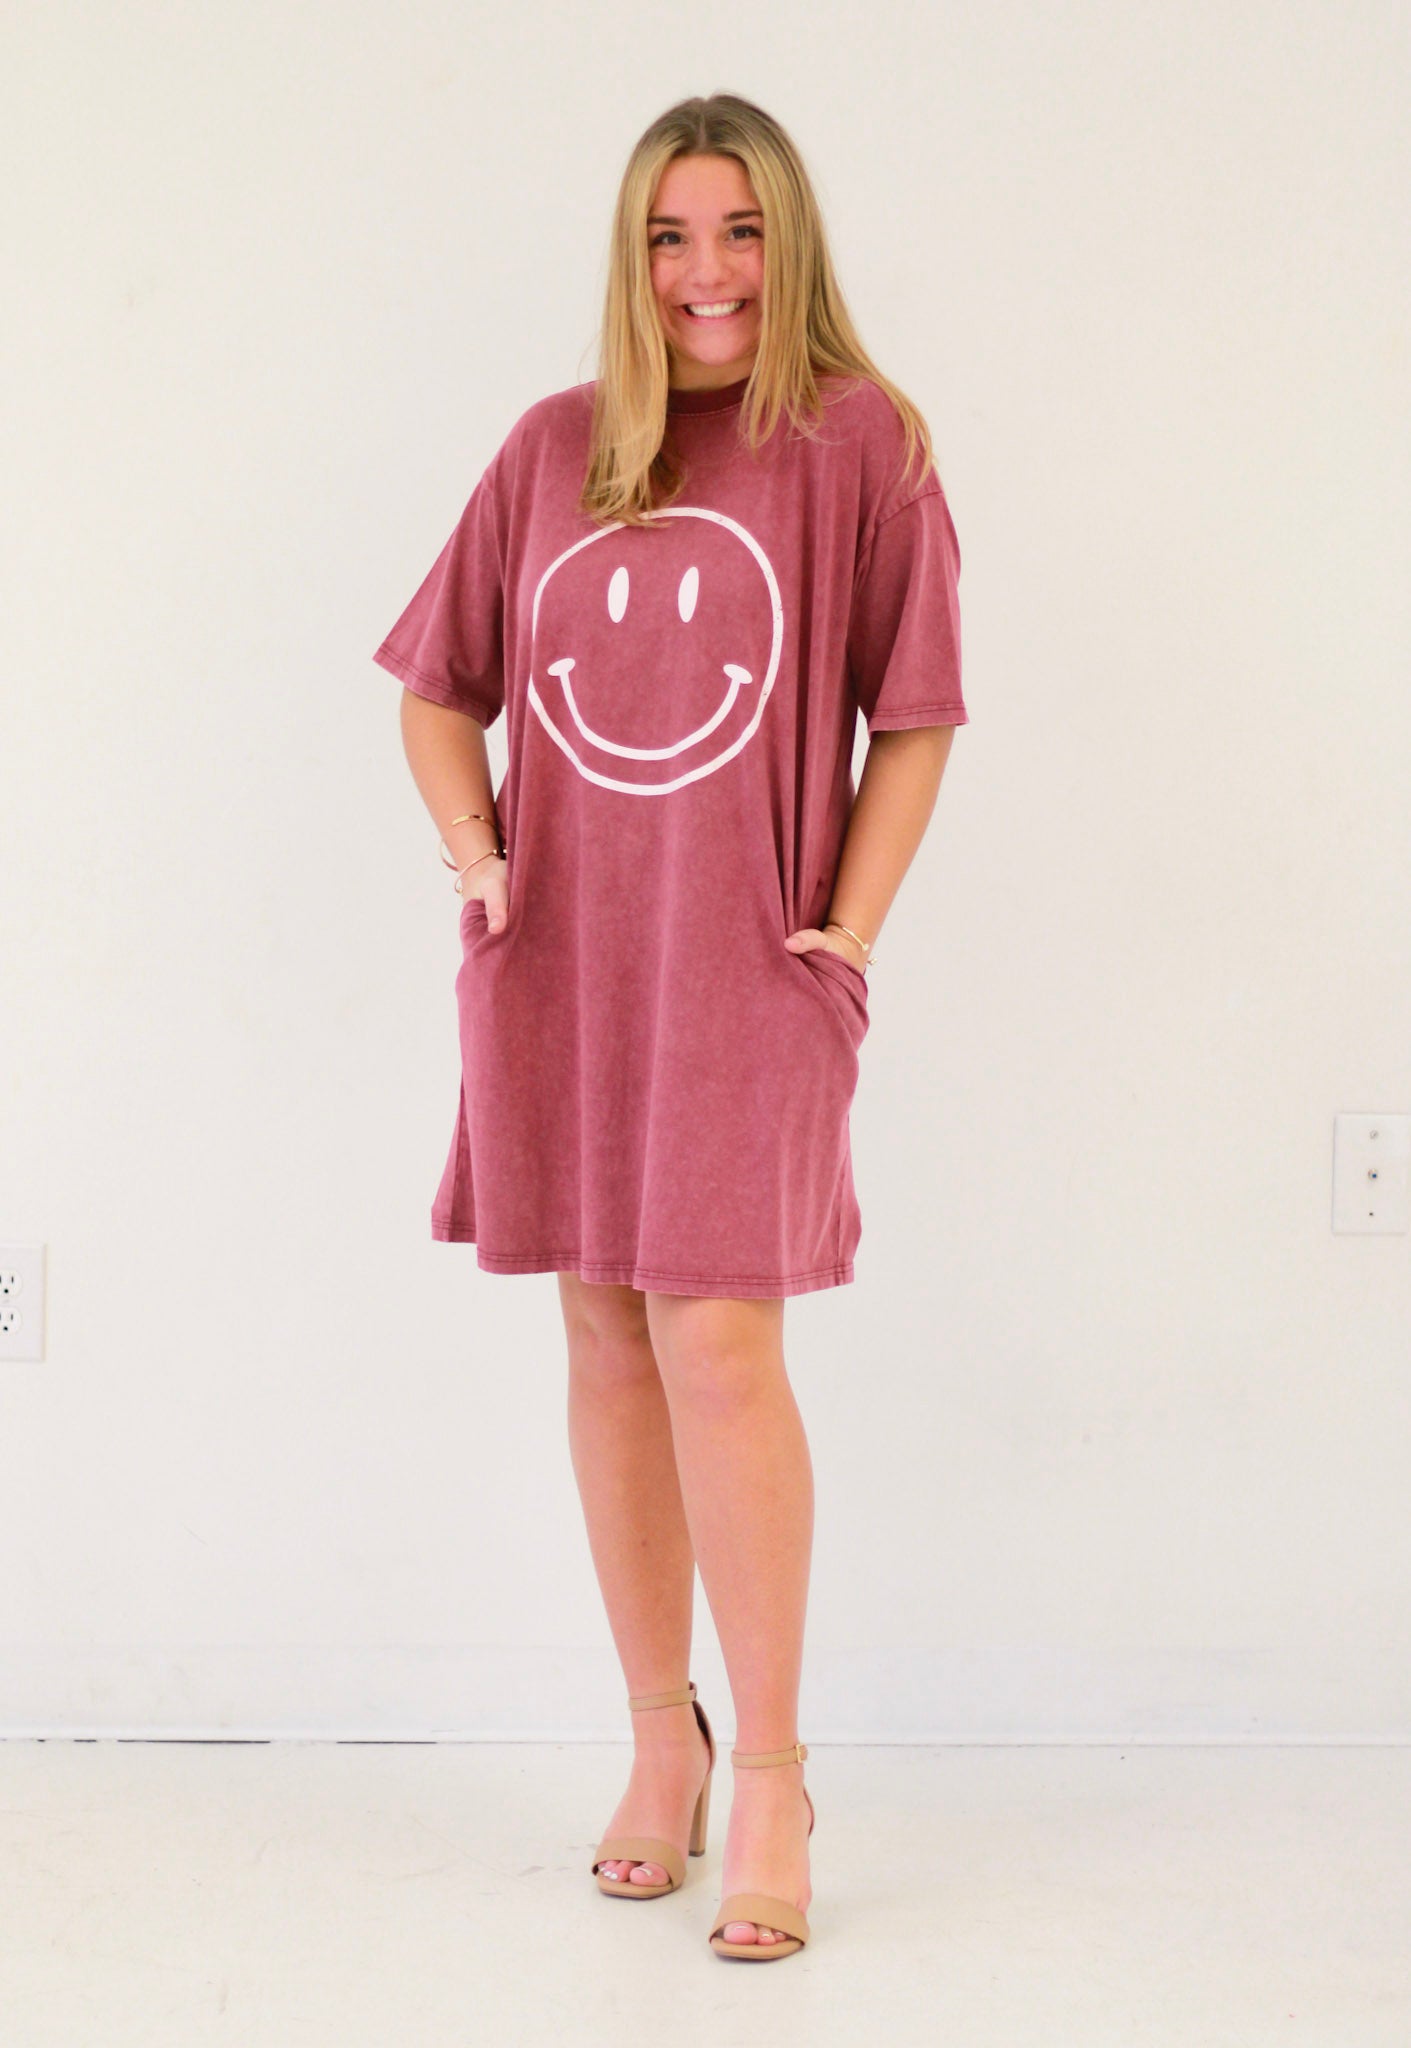 Smiling about Life Dress in Mulberry